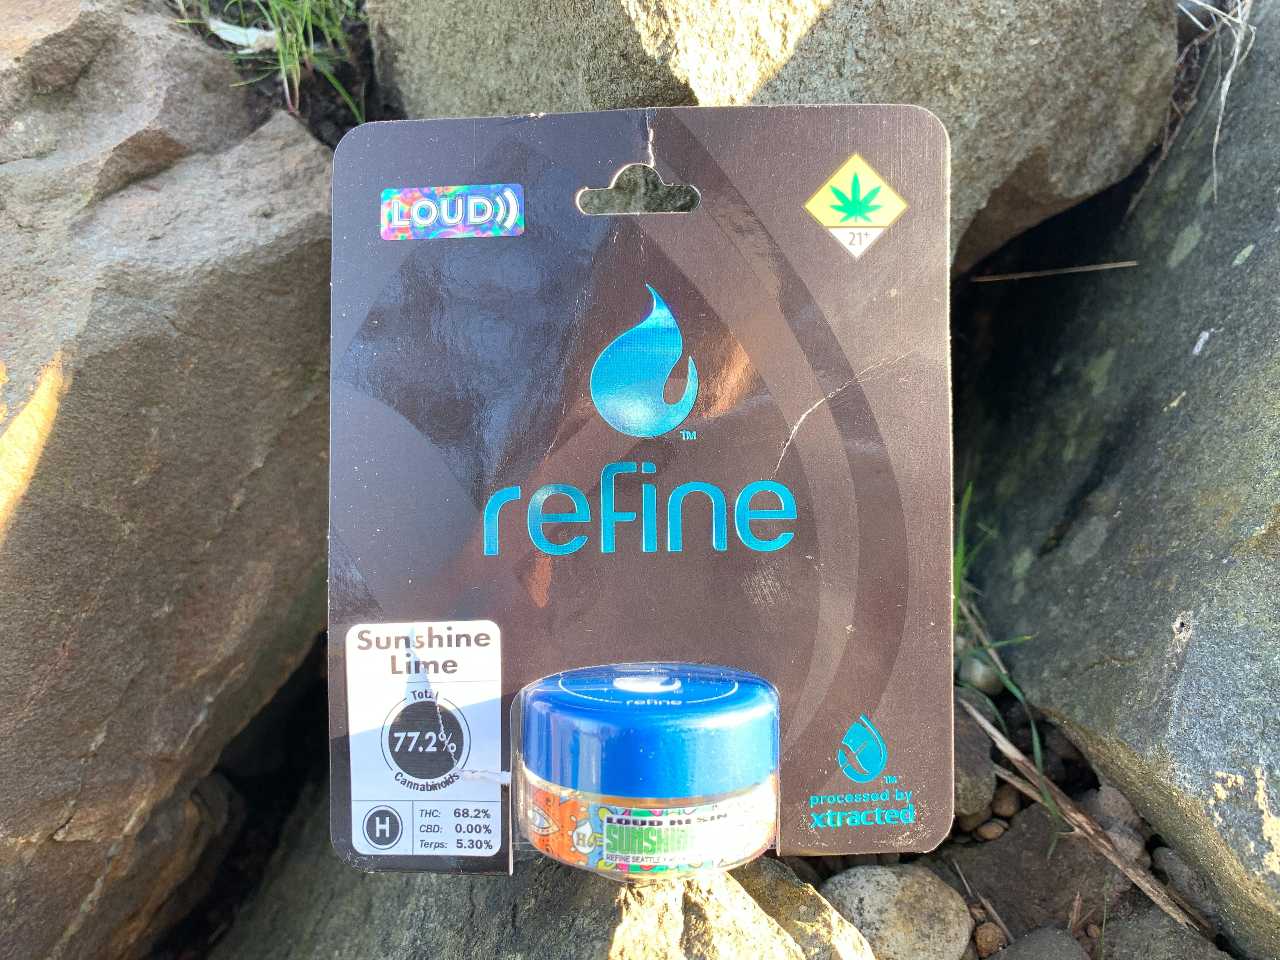 Sunshine Lime Loud Resin Review Featuring Refine Extracts In Seattle